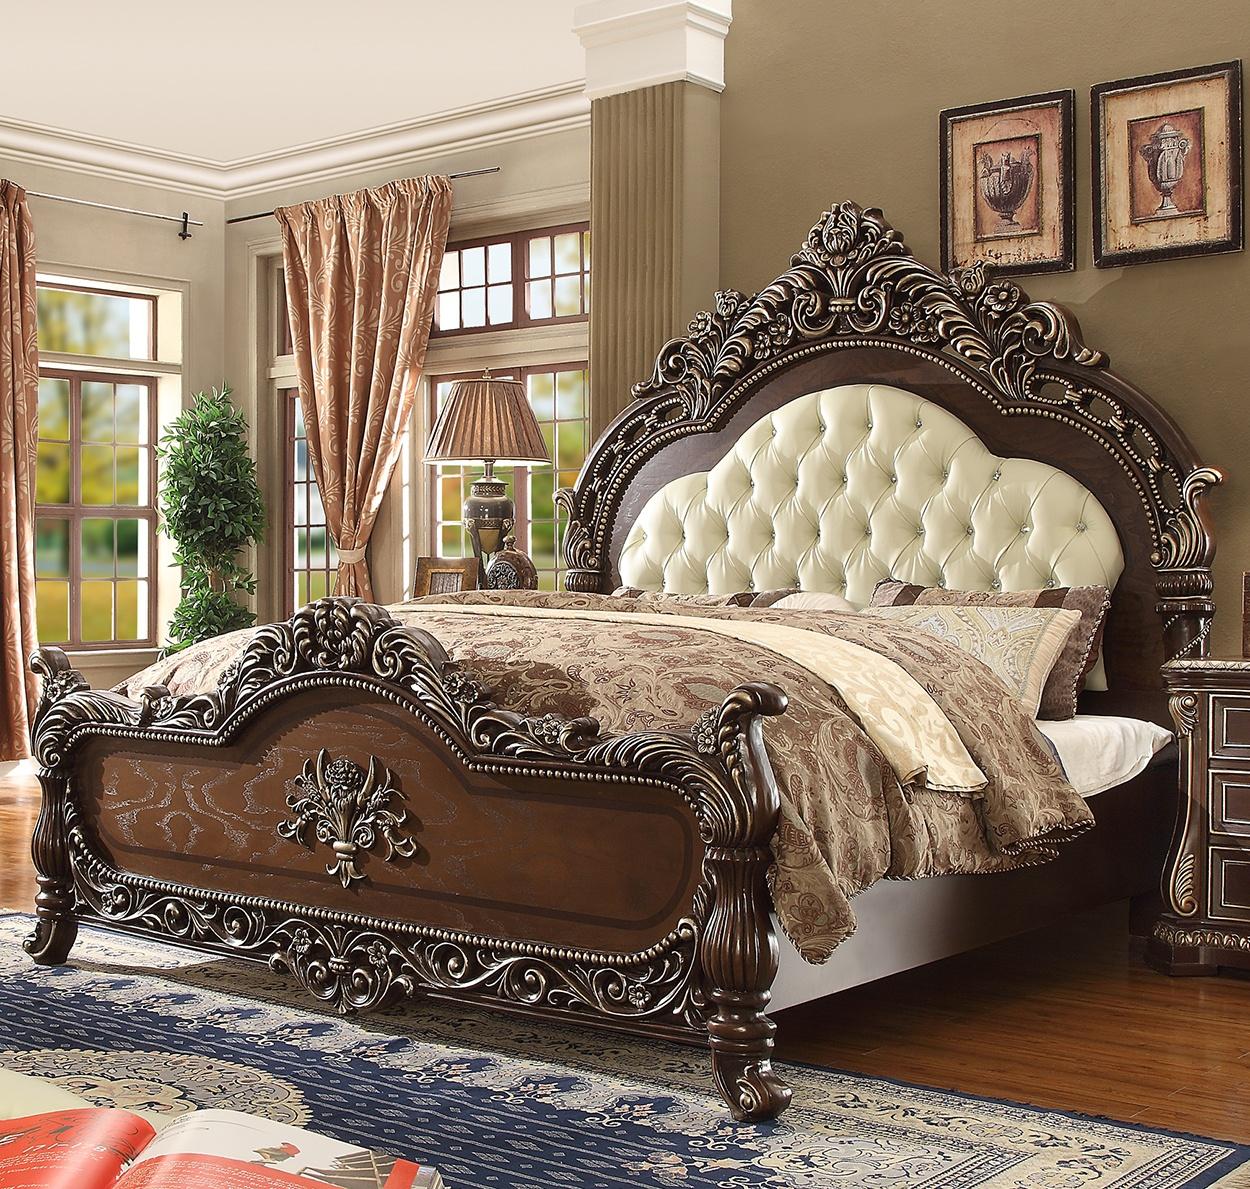 

    
Cherry Ivory Tufted HB Cal King Bedroom Set 3Pcs Traditional Homey Design HD-8013
